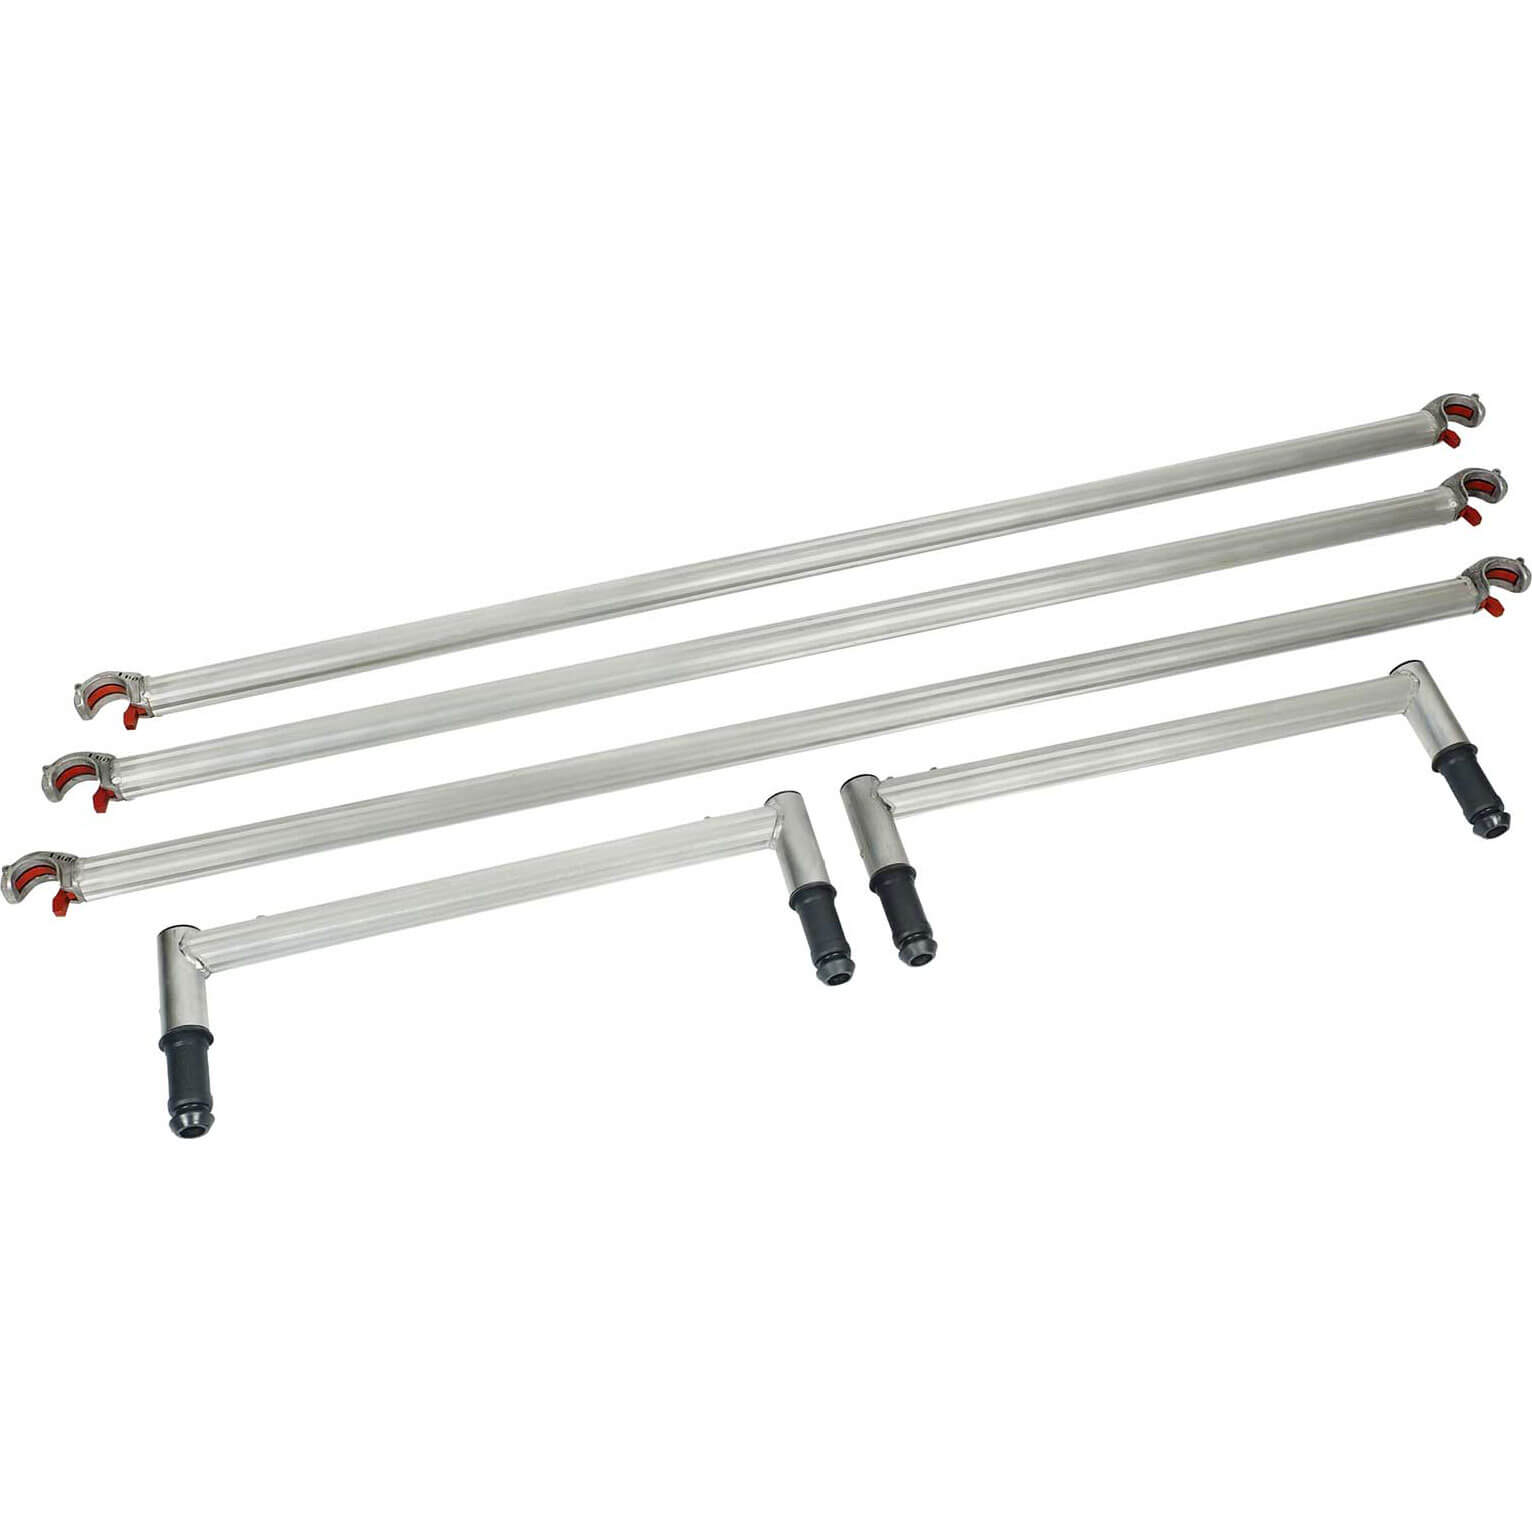 Photo of Youngman Minimax Guardrail Pack - 1 Rung